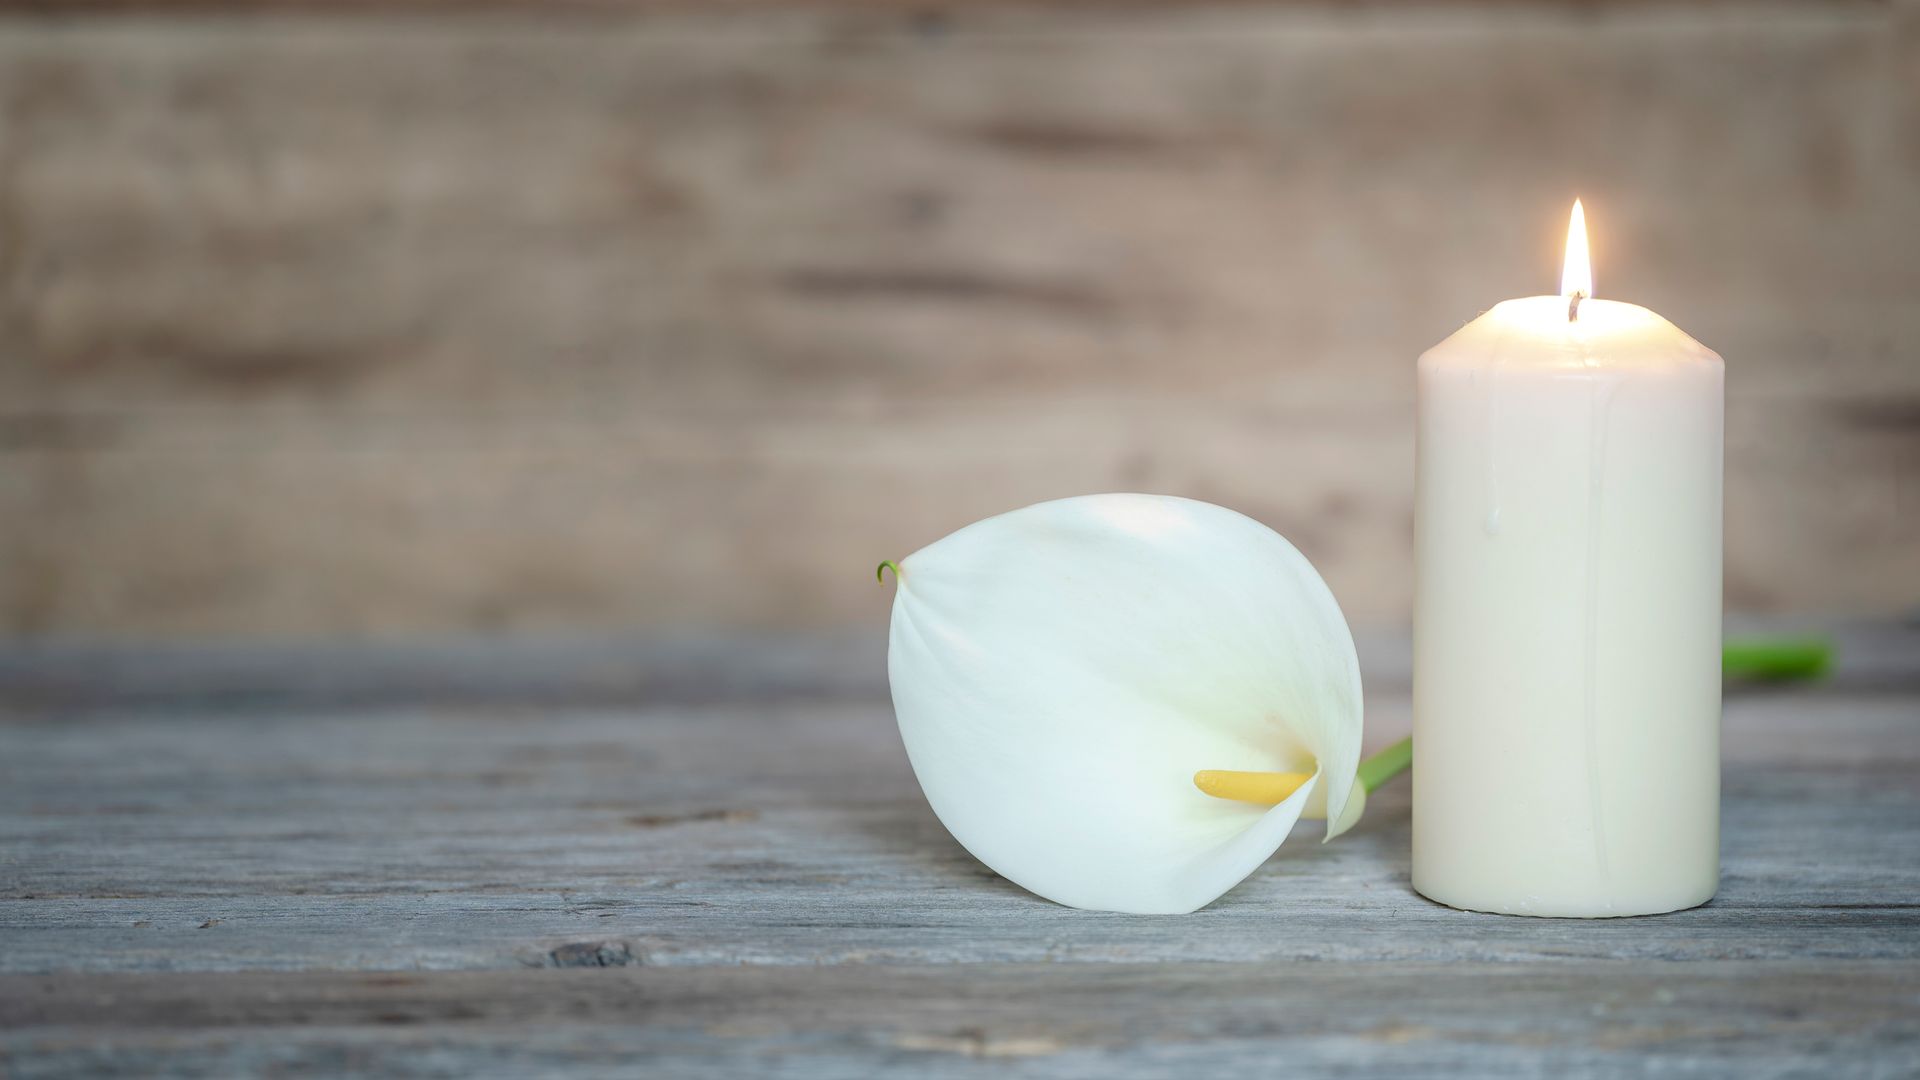 A white flower and a lit candle on a wooden table.